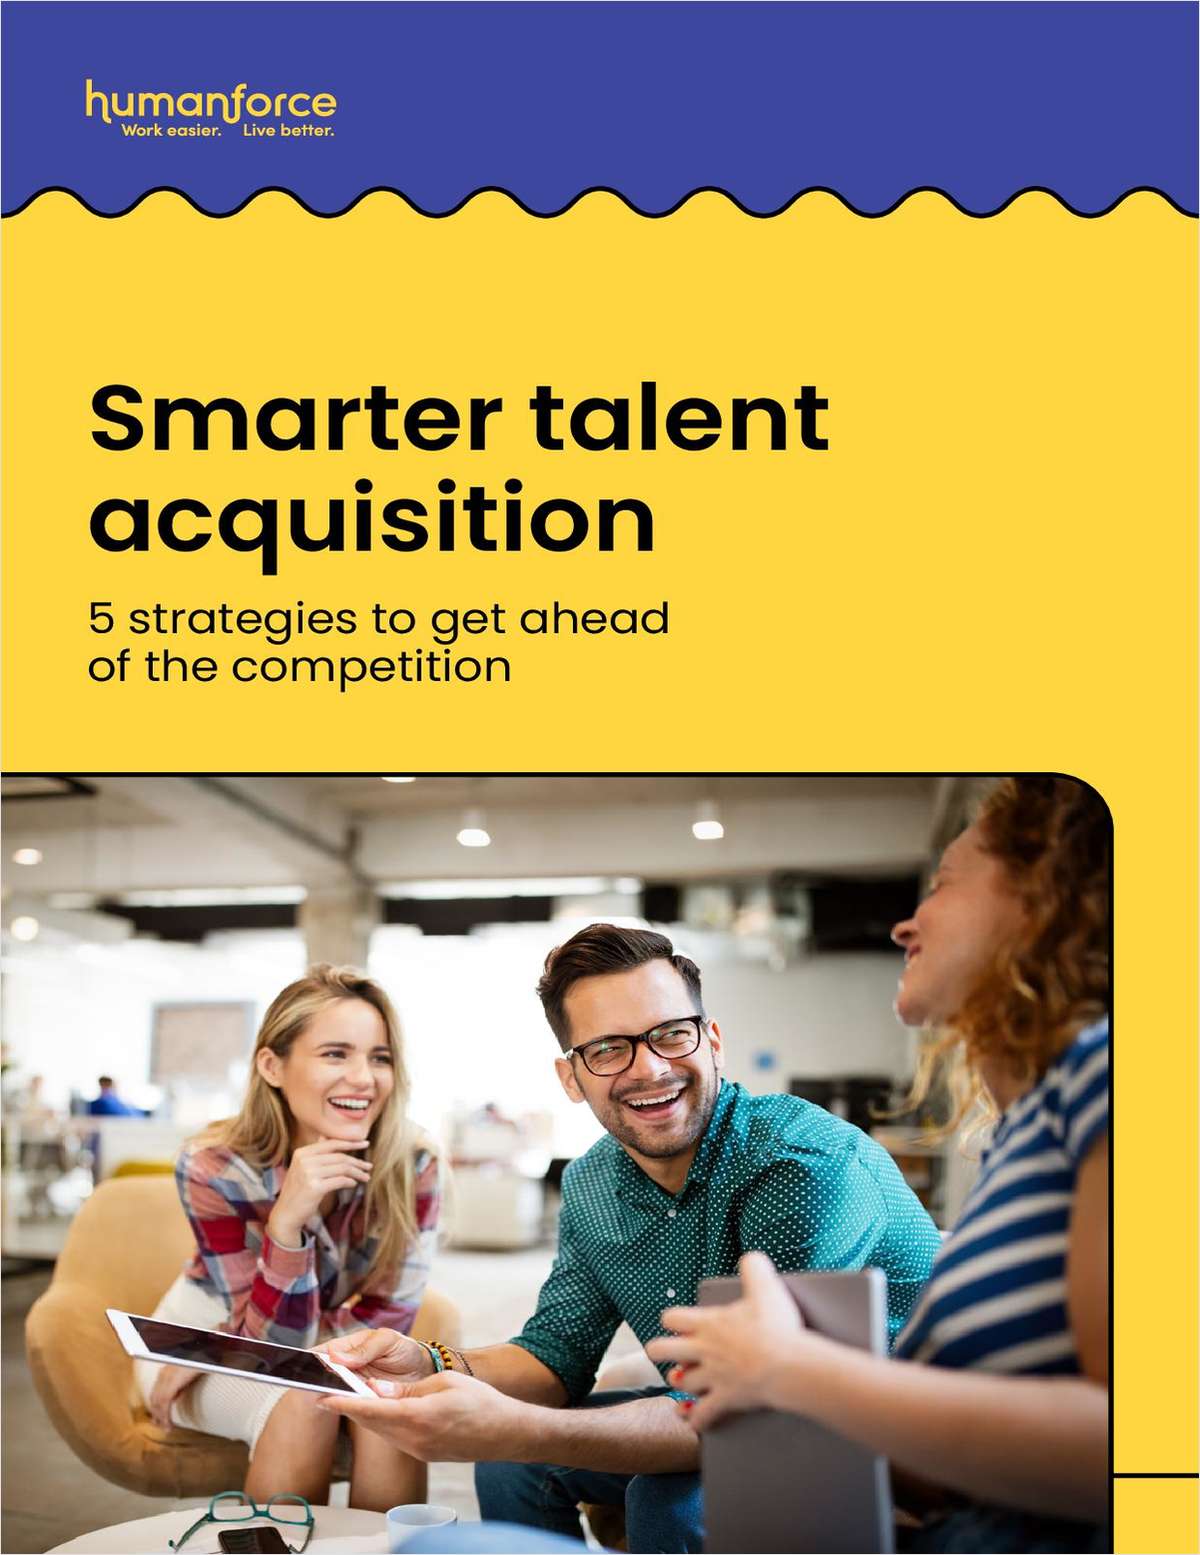 Talent acquisition made easy